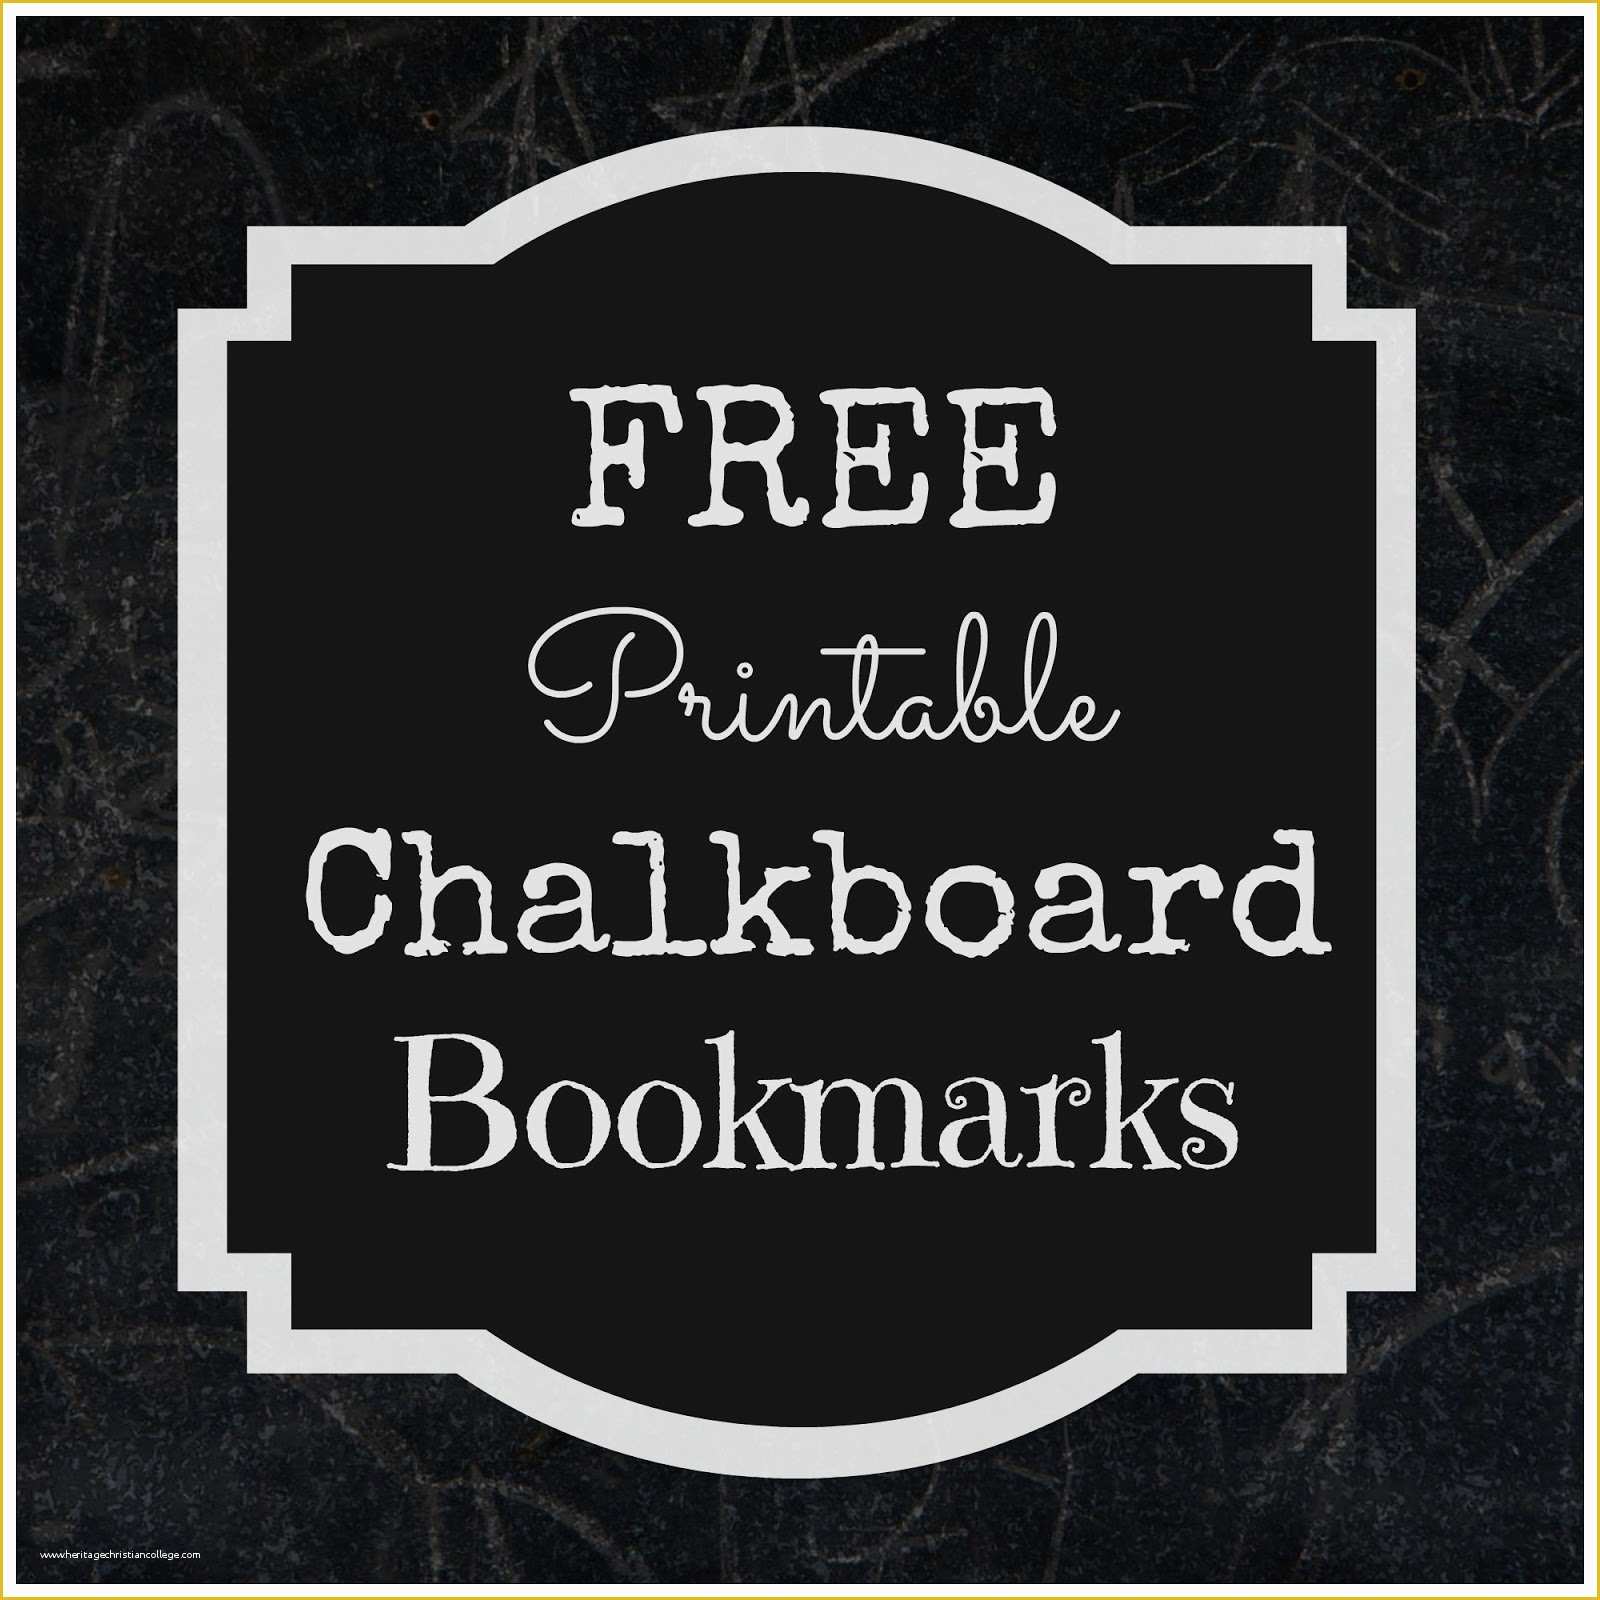 Free Chalkboard Template Of Search Results for “free Chalkboard Printable Invitation